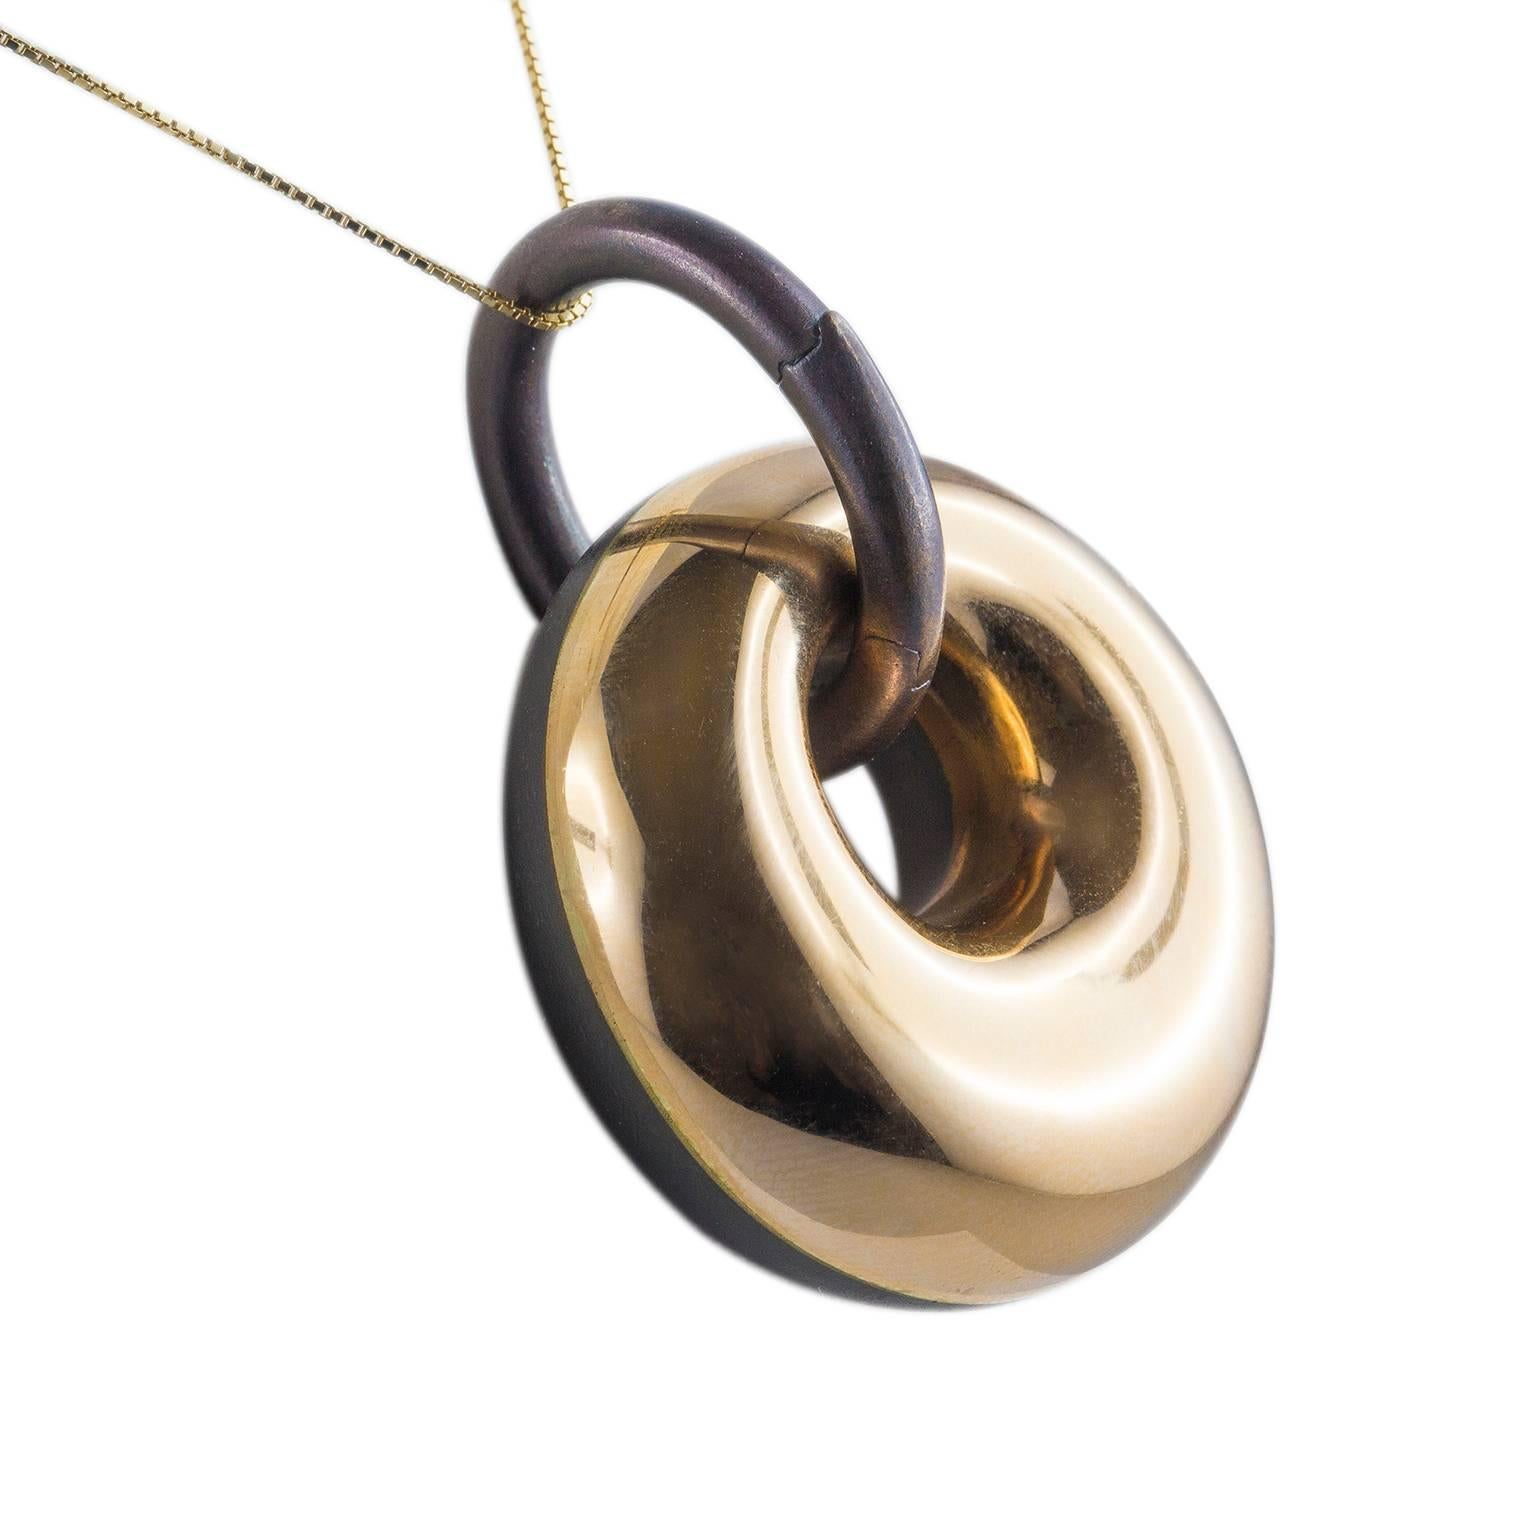 Modern pendant from the essential line in 18KT yellow gold and bronze. On the bronze side a small spot of light with a 0,02 ct brilliant cut diamond.